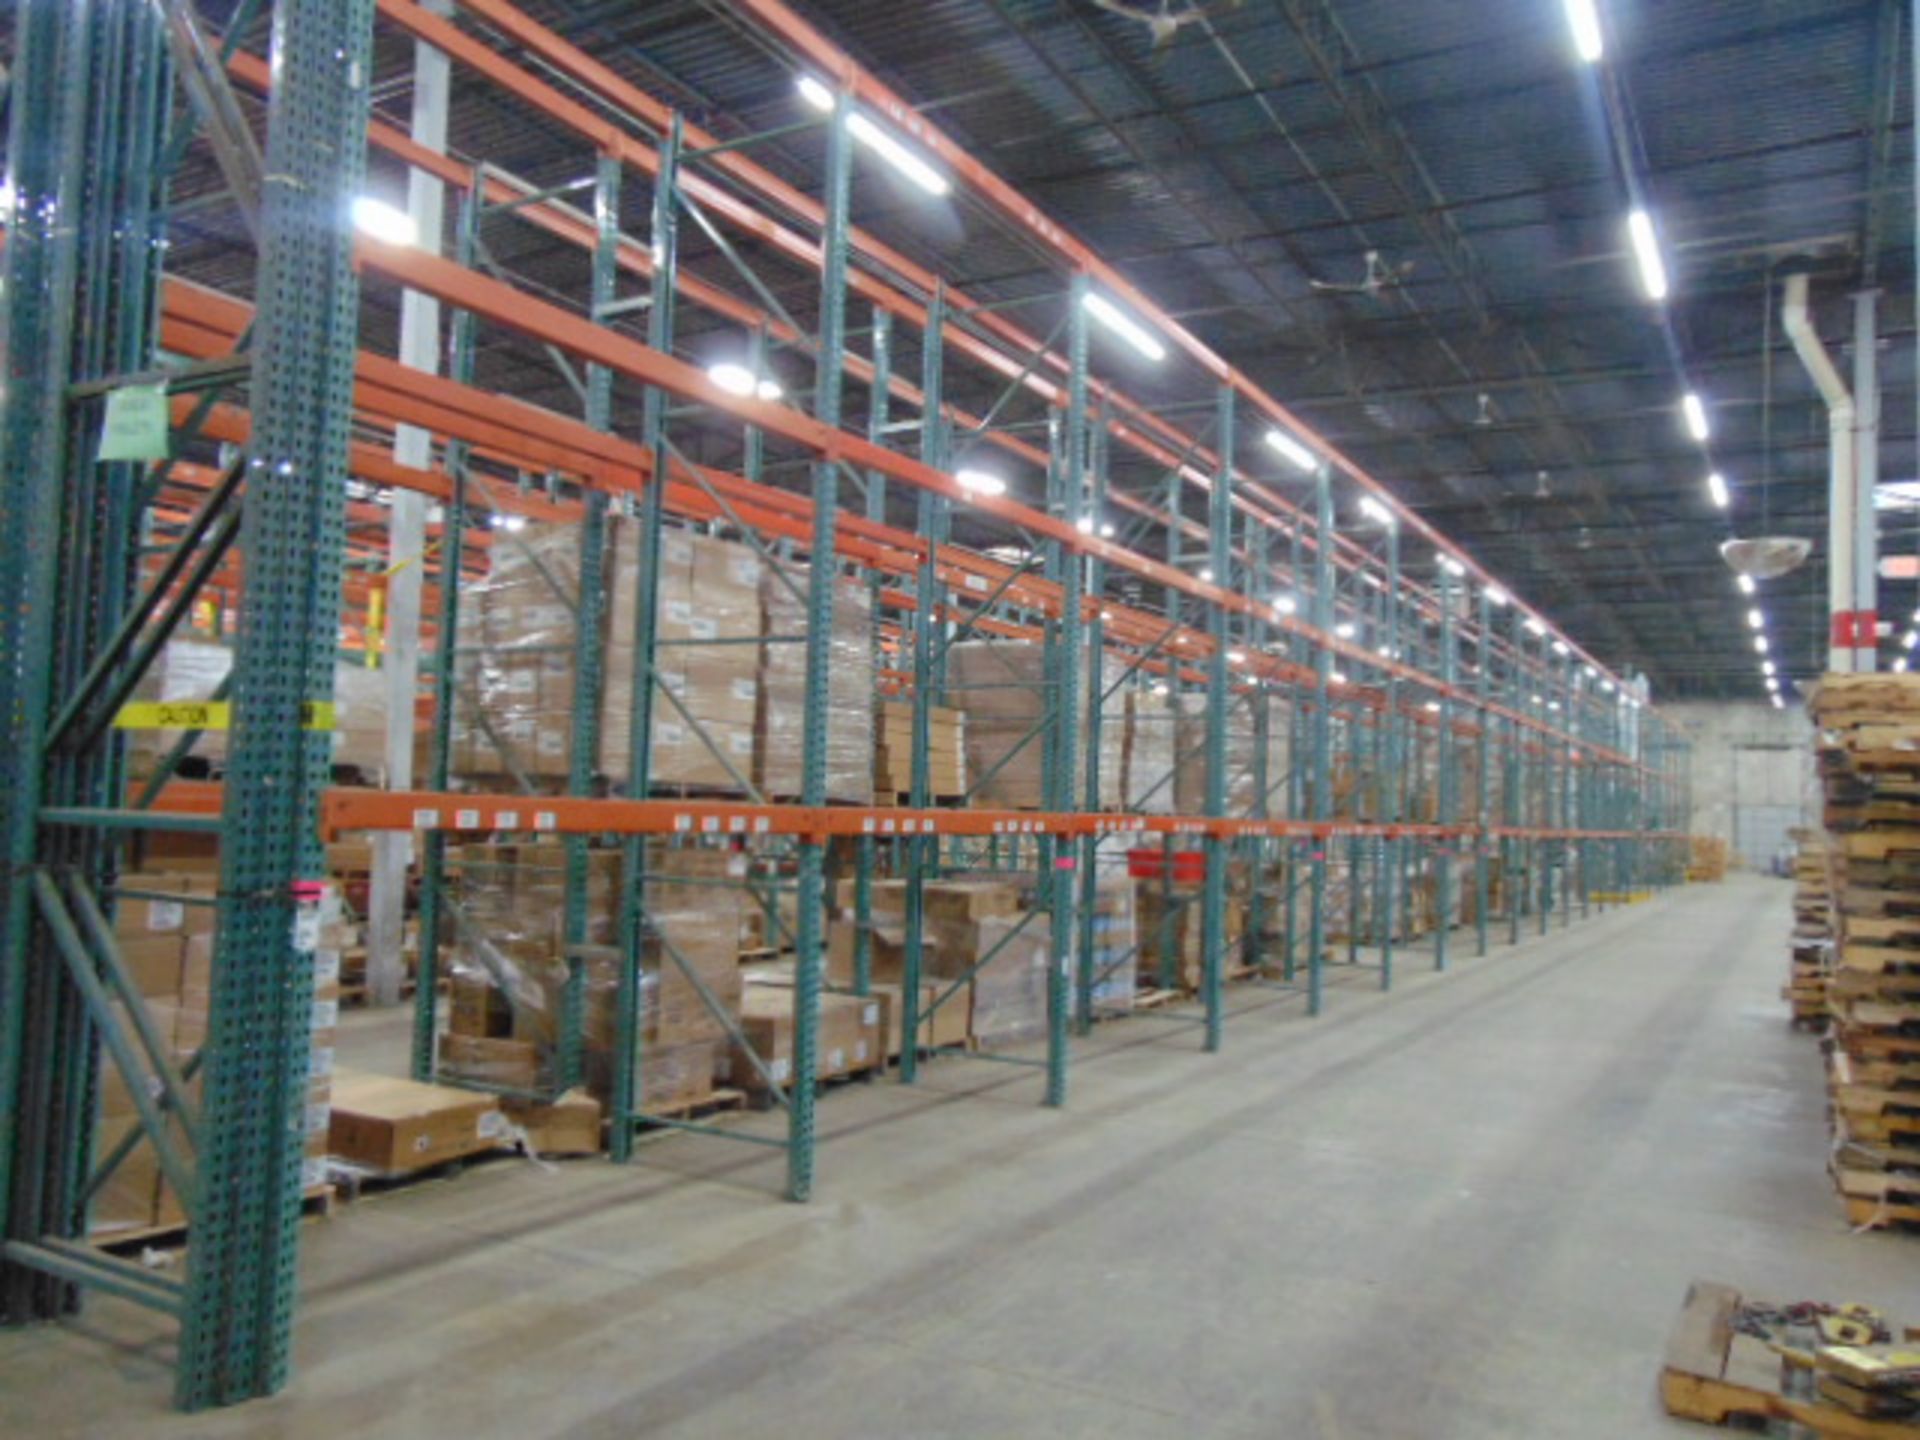 LOT OF PALLET RACK SECTIONS (42), 16' ht. x 92"W. x 42" dp.